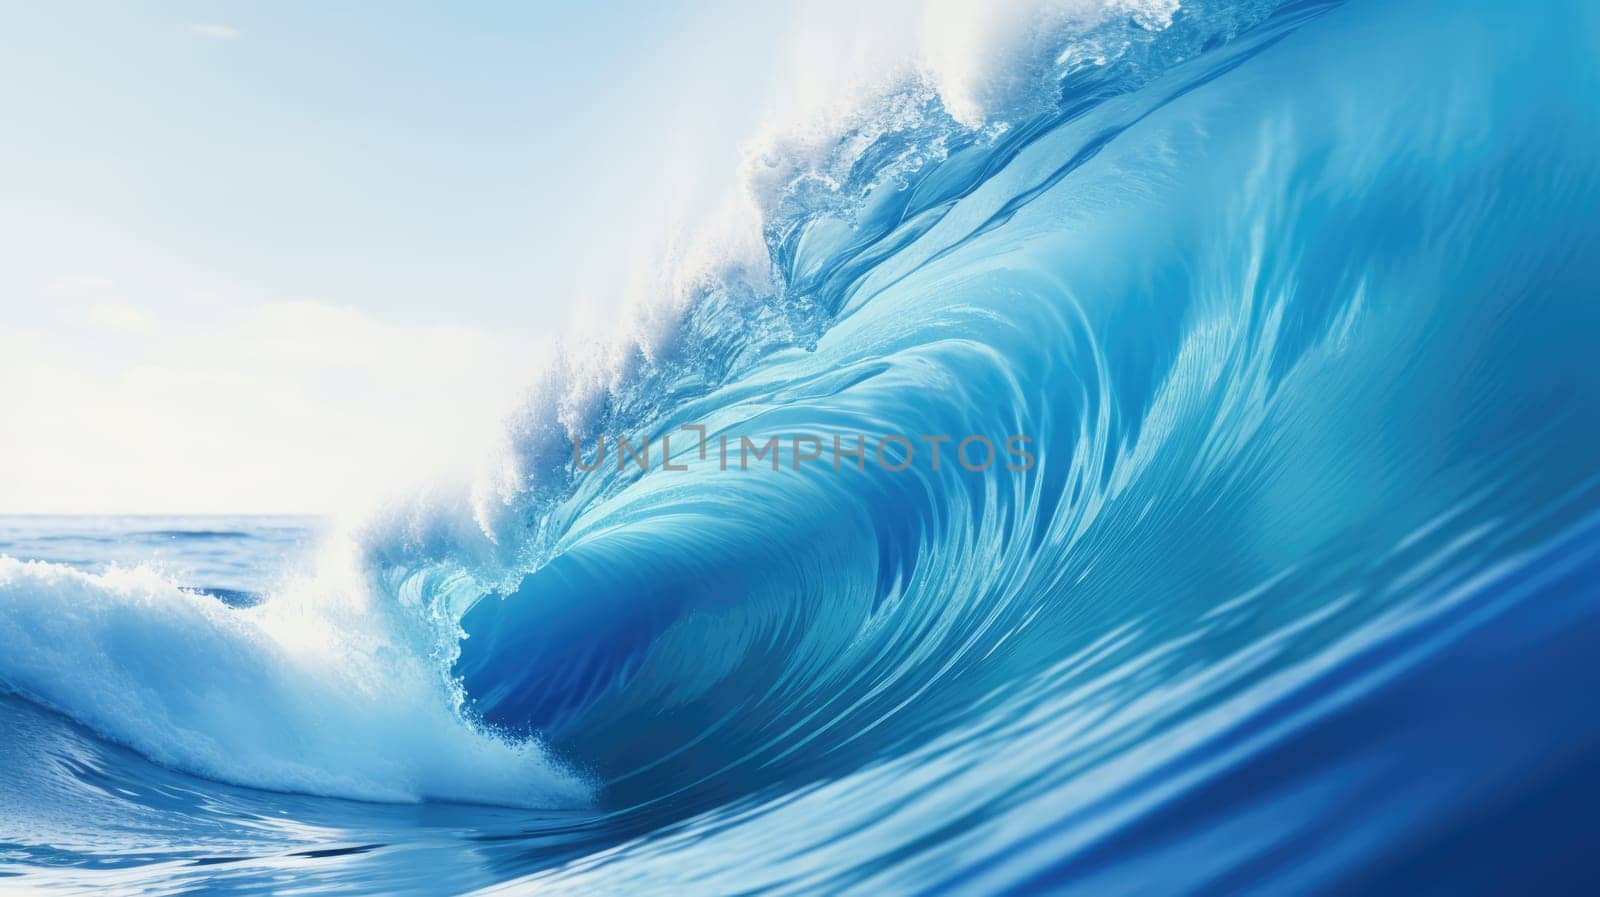 Ocean wave at wind. Huge wave breaking with a lot of spray and splash. Sea water background